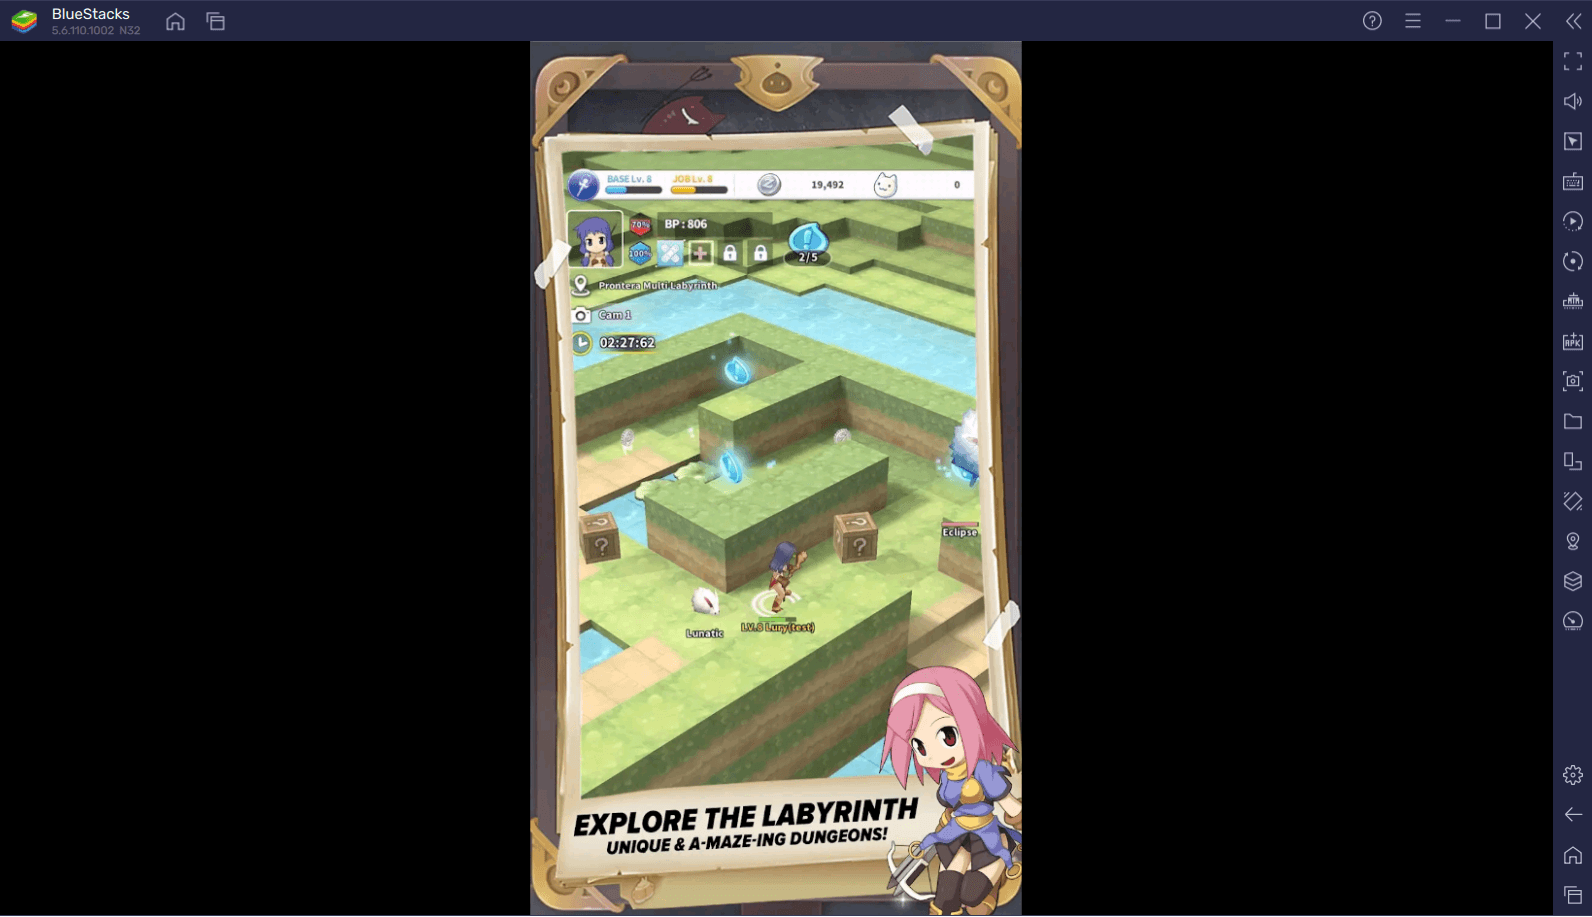 How to Install and Play Ragnarok Labyrinth NFT on PC with BlueStacks